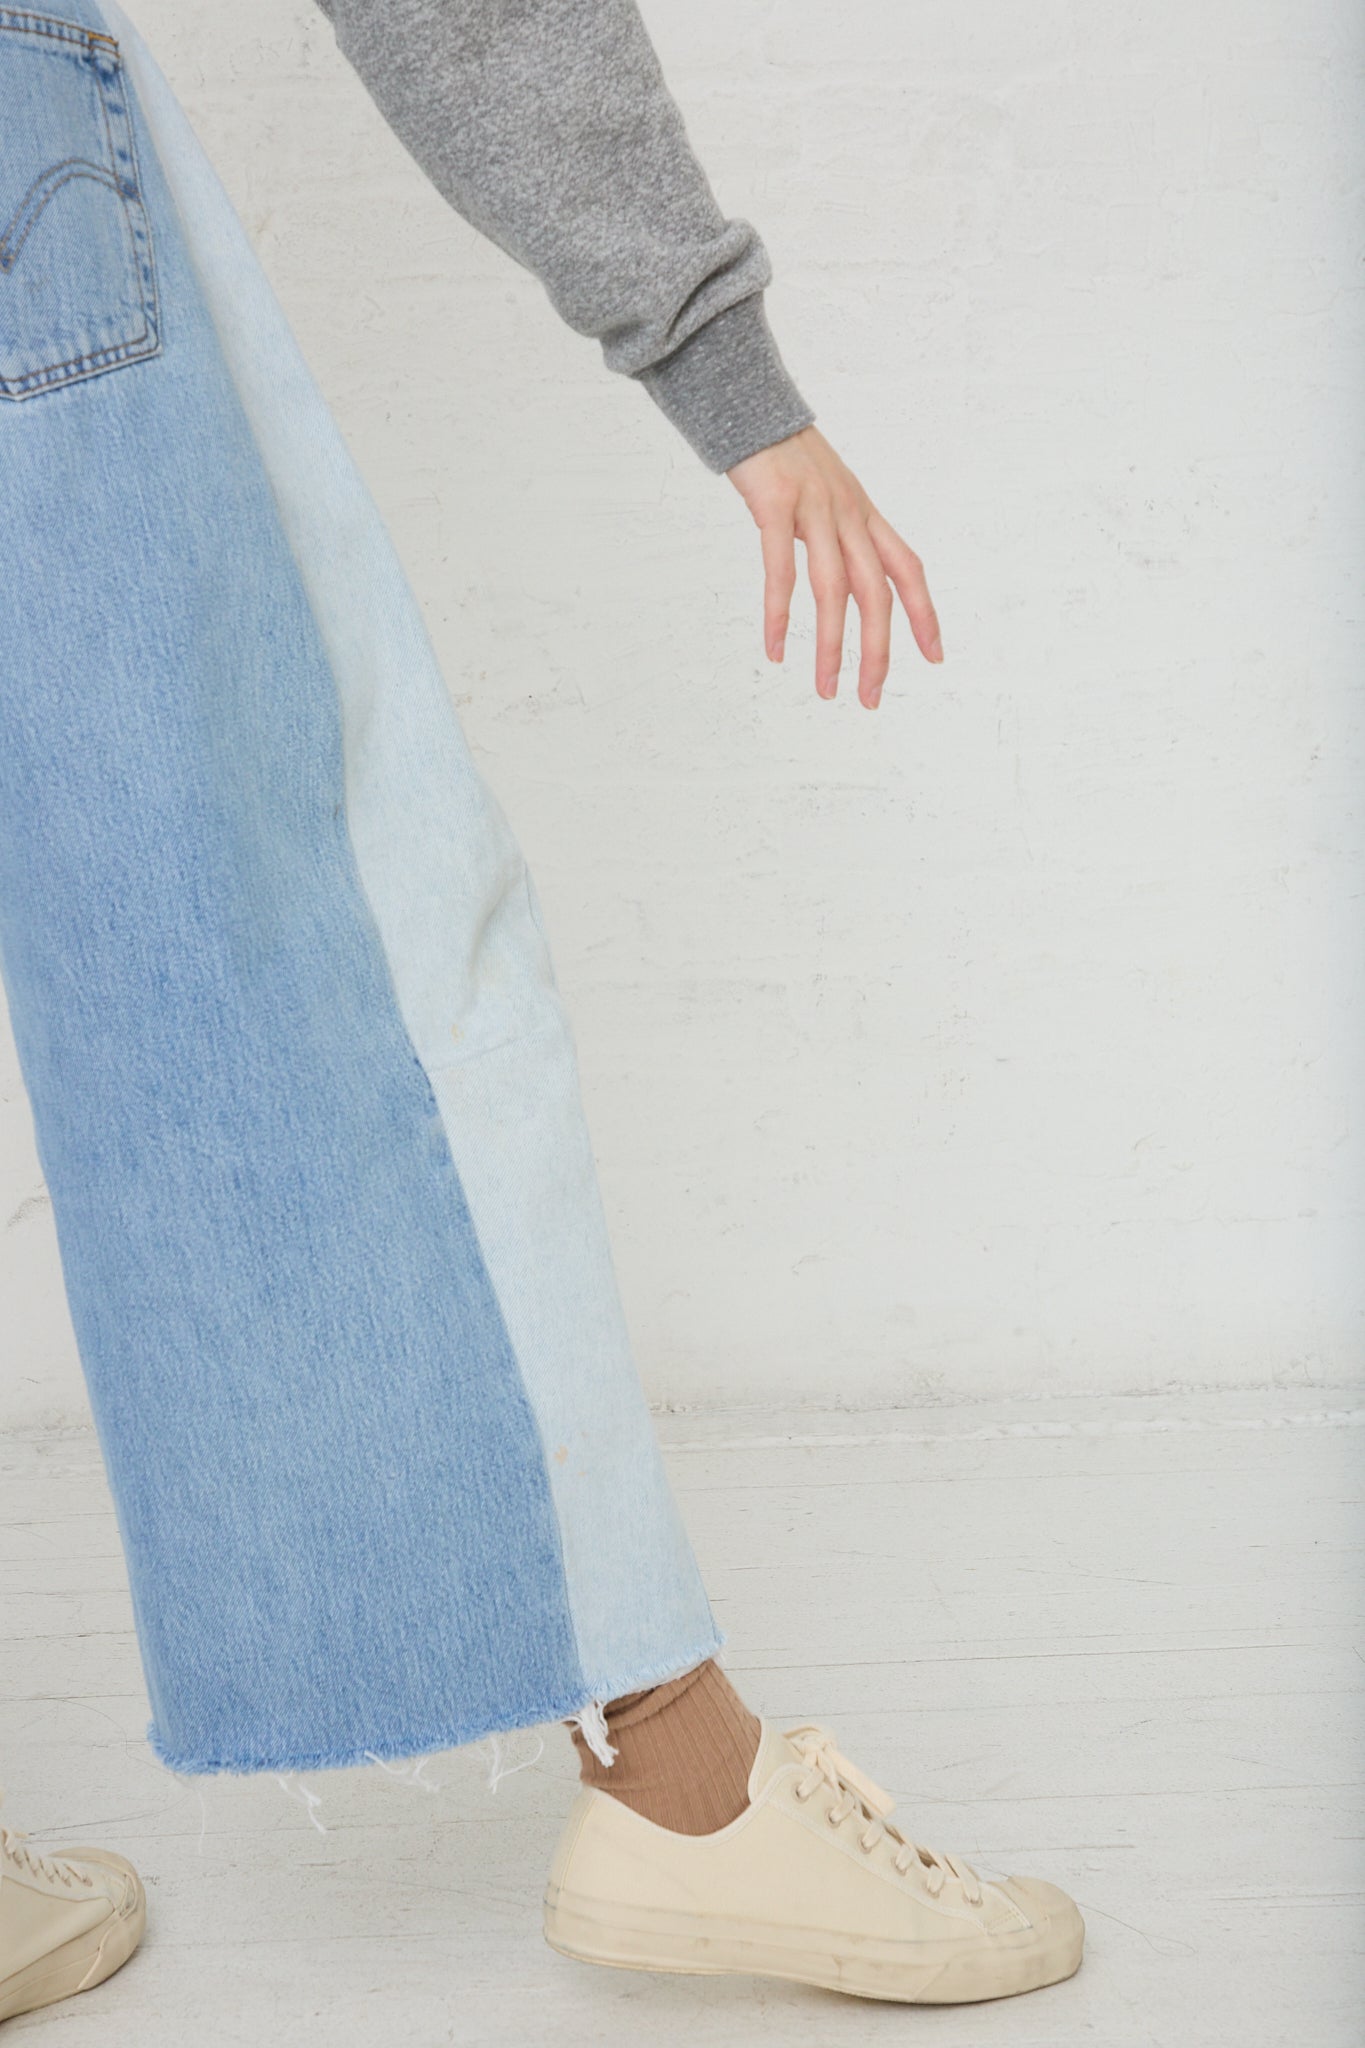 A woman wearing a pair of B Sides Lasso Jean in Vintage Indigo denim jeans and a cozy sweater.